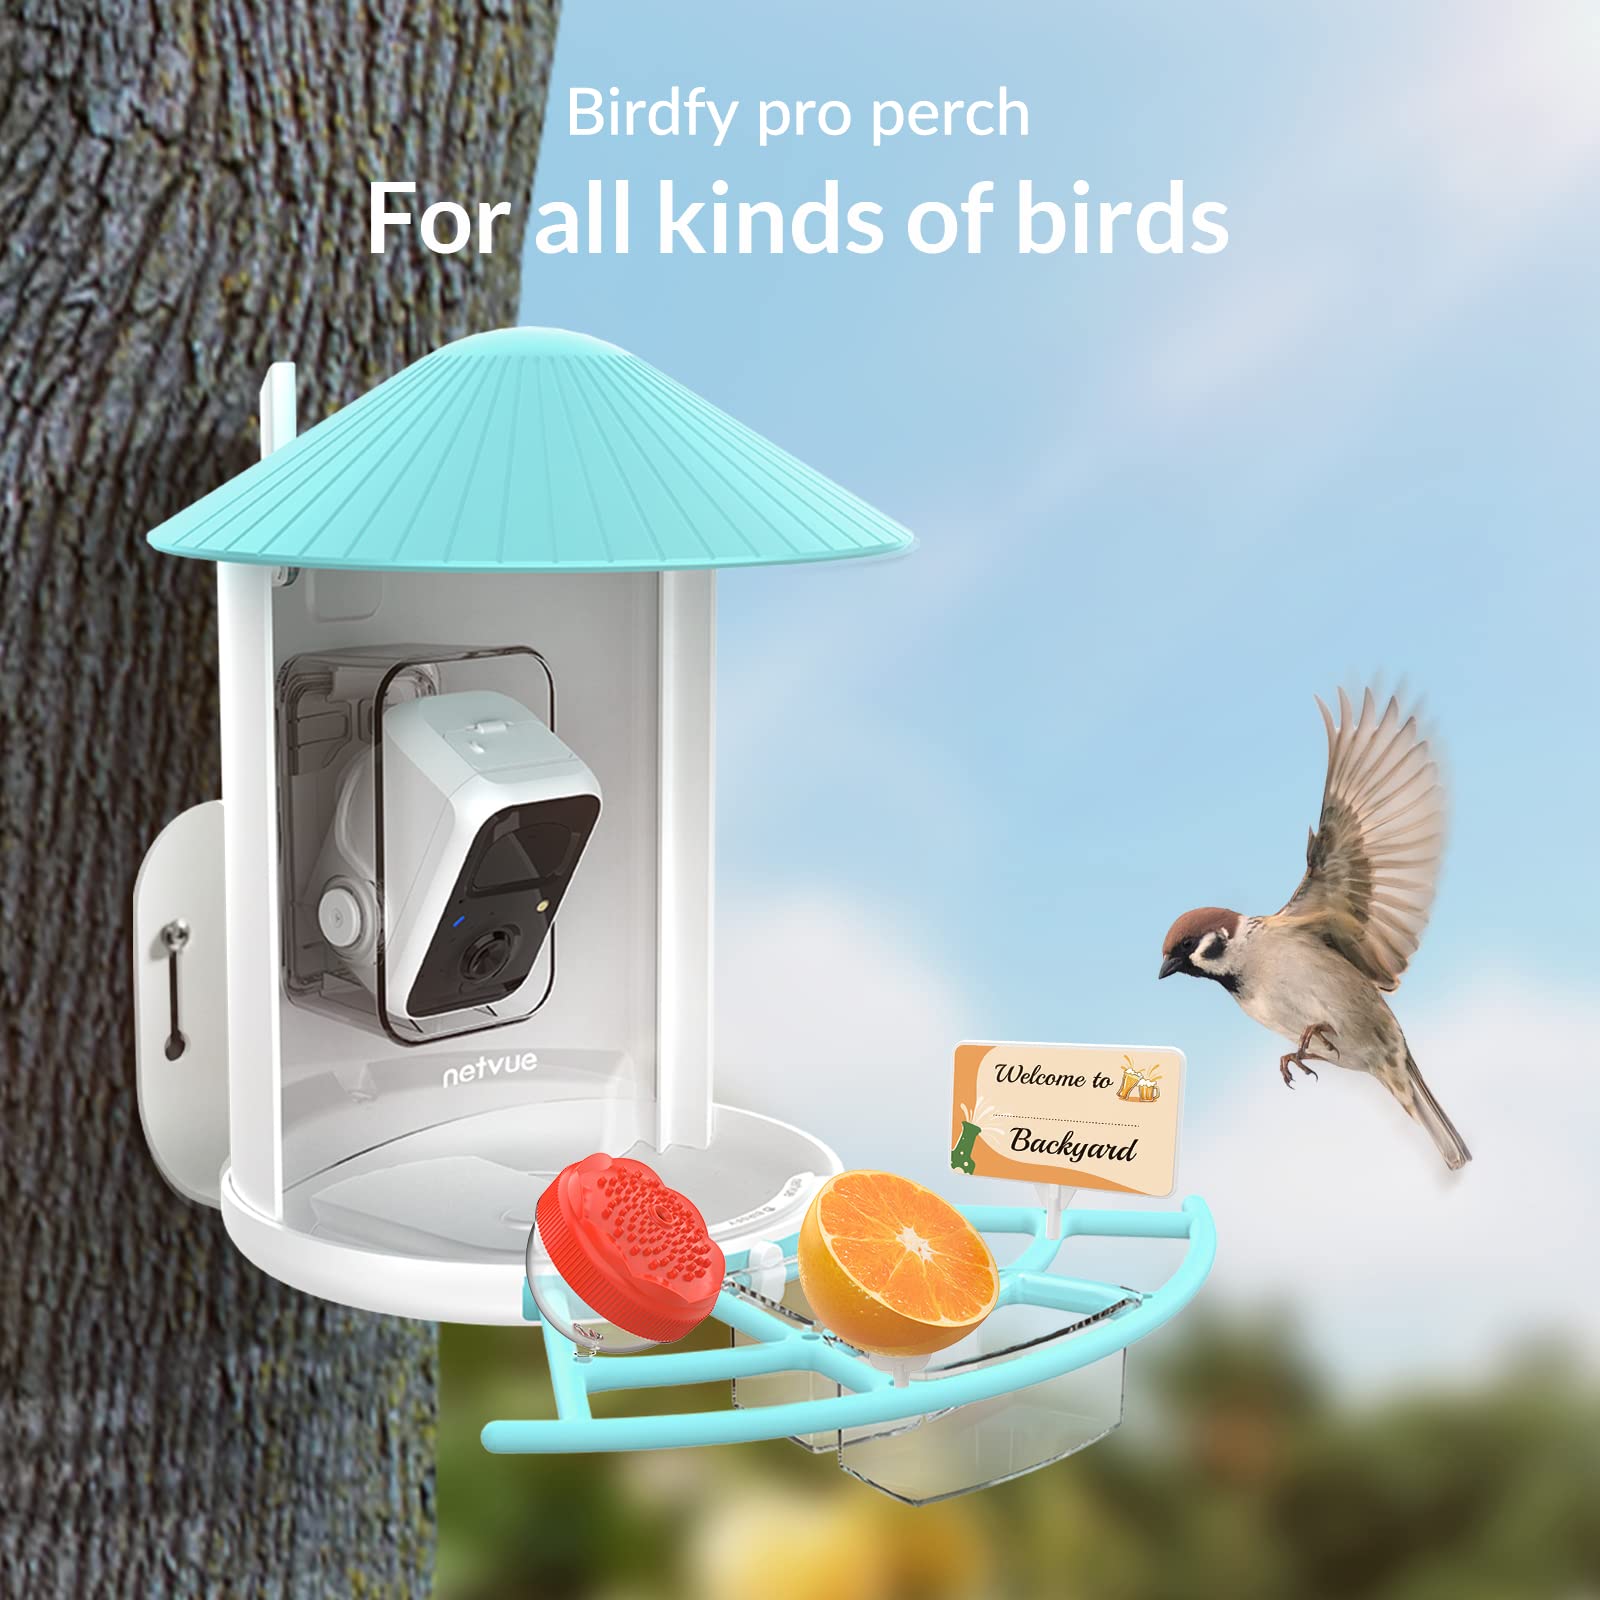 NETVUE Birdfy Pro Perch - Wider Extension Perch to DIY Add-ons Including Suet Ball, Mini Hummingbird Feeder, Fruit Holder, Jelly Feeder and Welcome Card, Ideal for Bird Lover